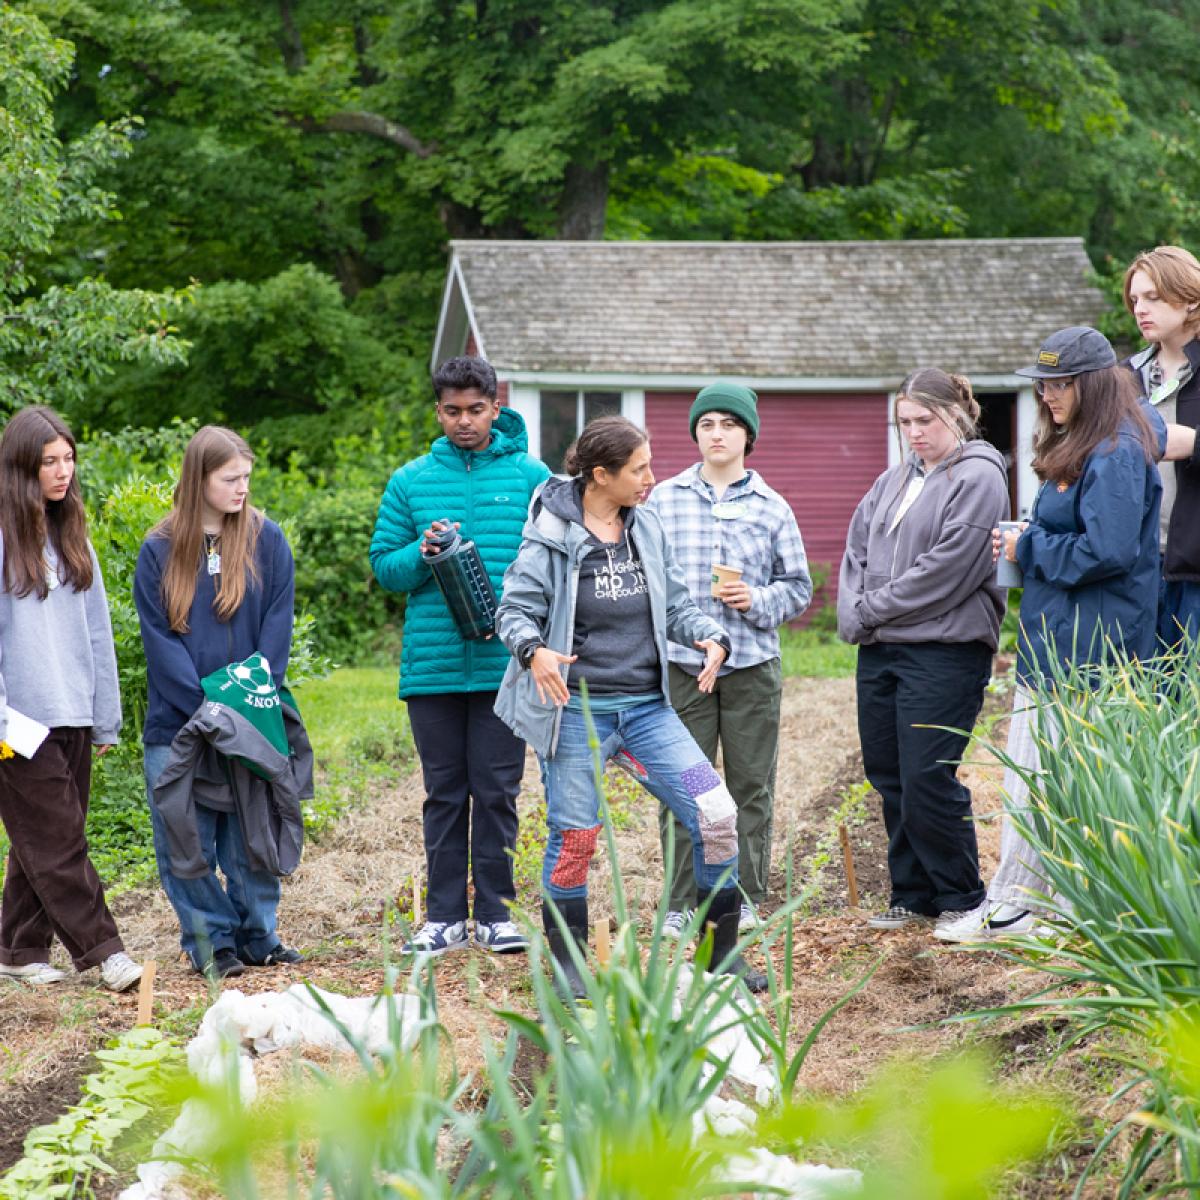 Students and educators gather near a garden